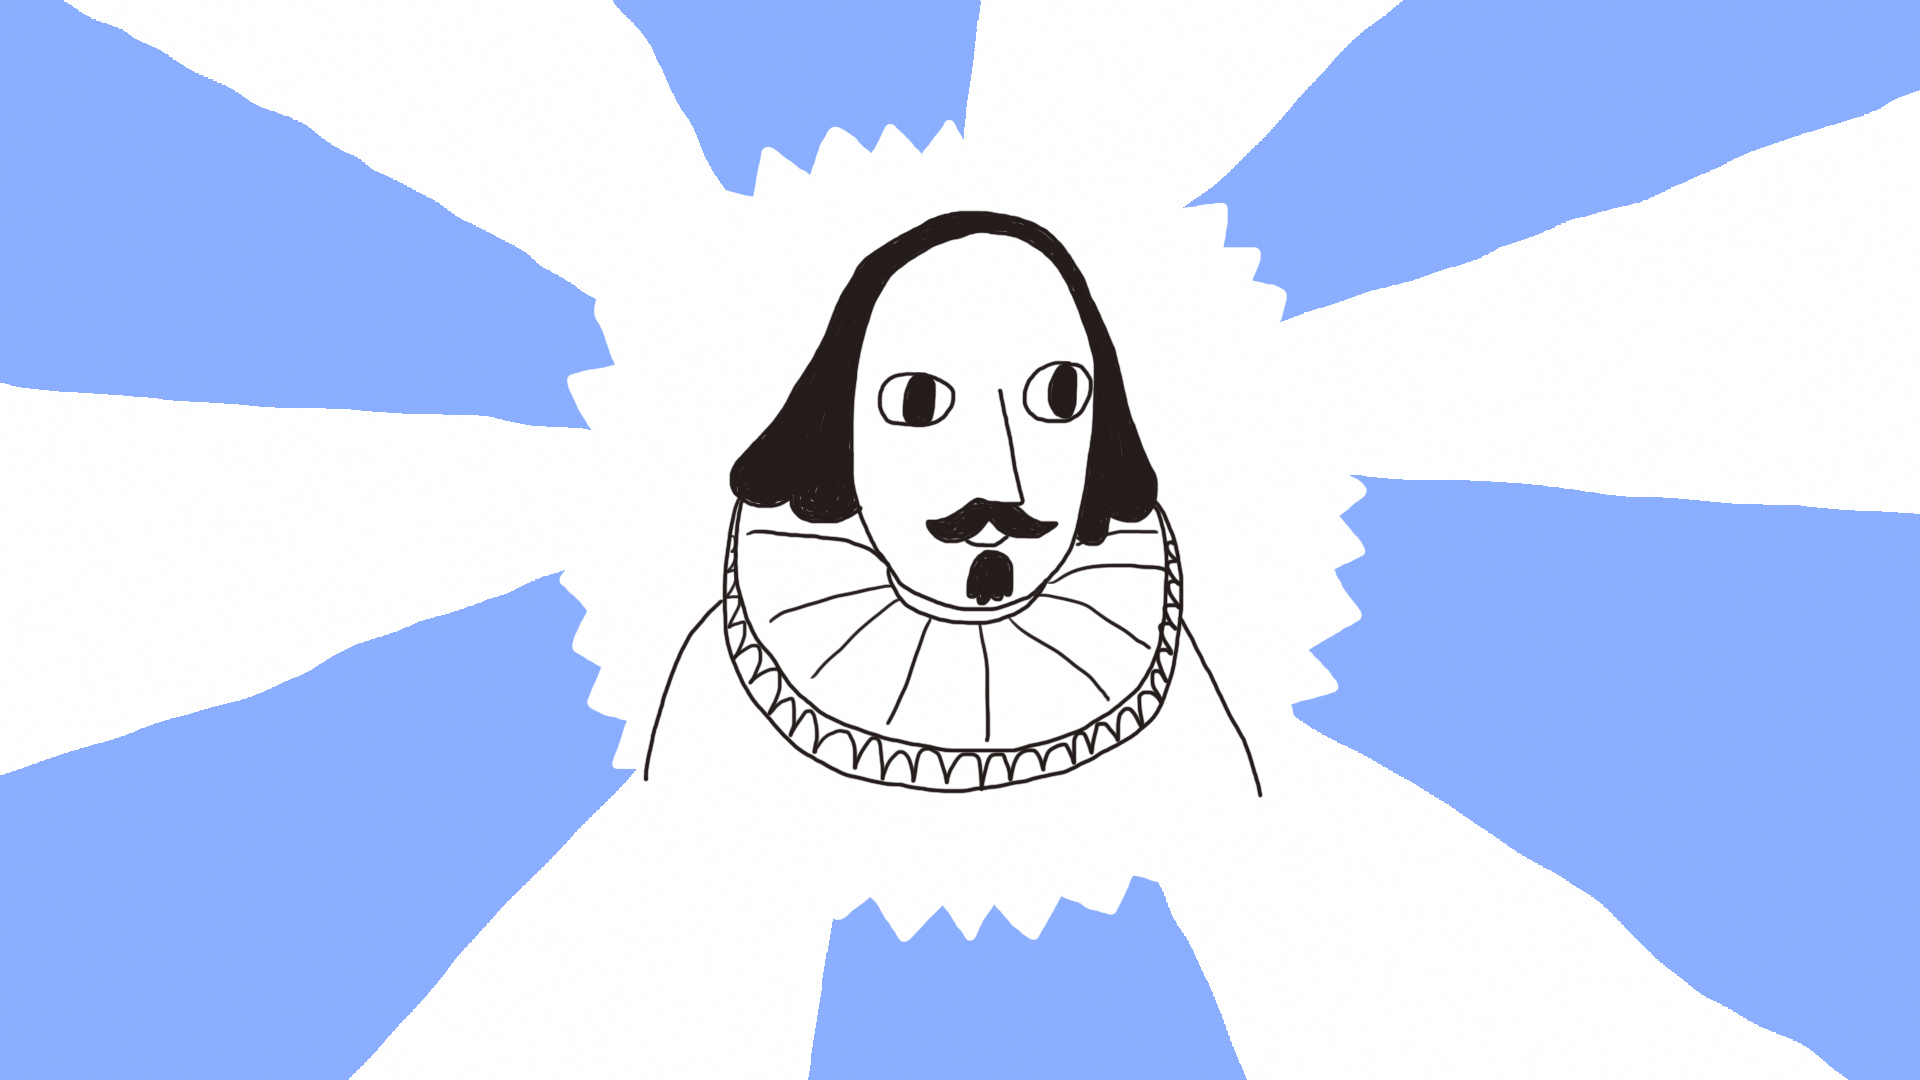 Sketch of William Shakespeare’s detailed features